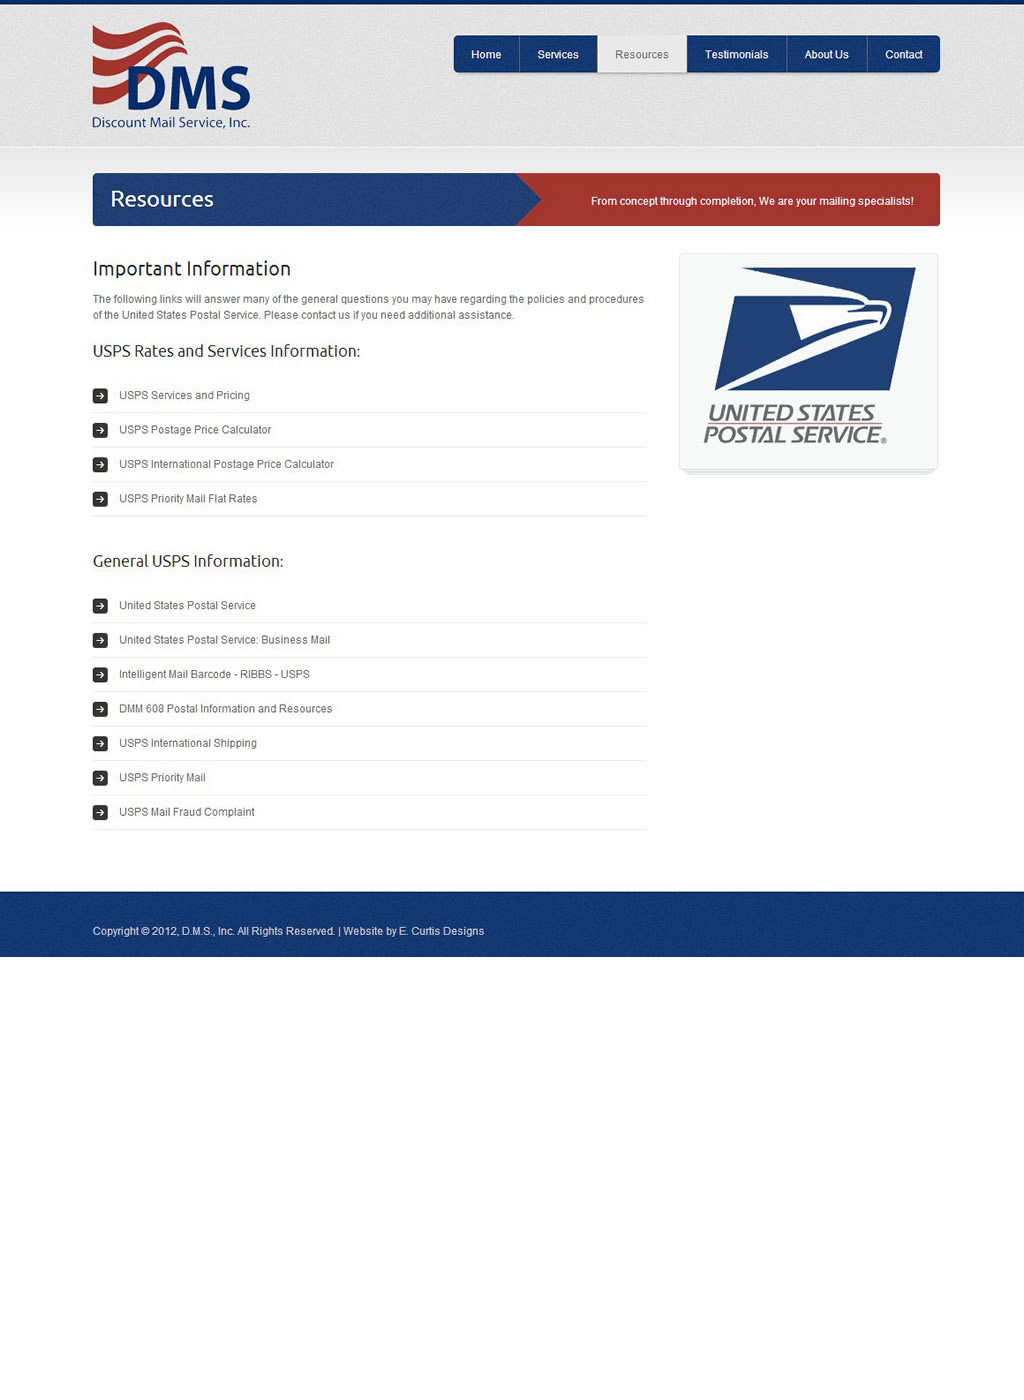 Resources page of Discount Mail Services, Inc.